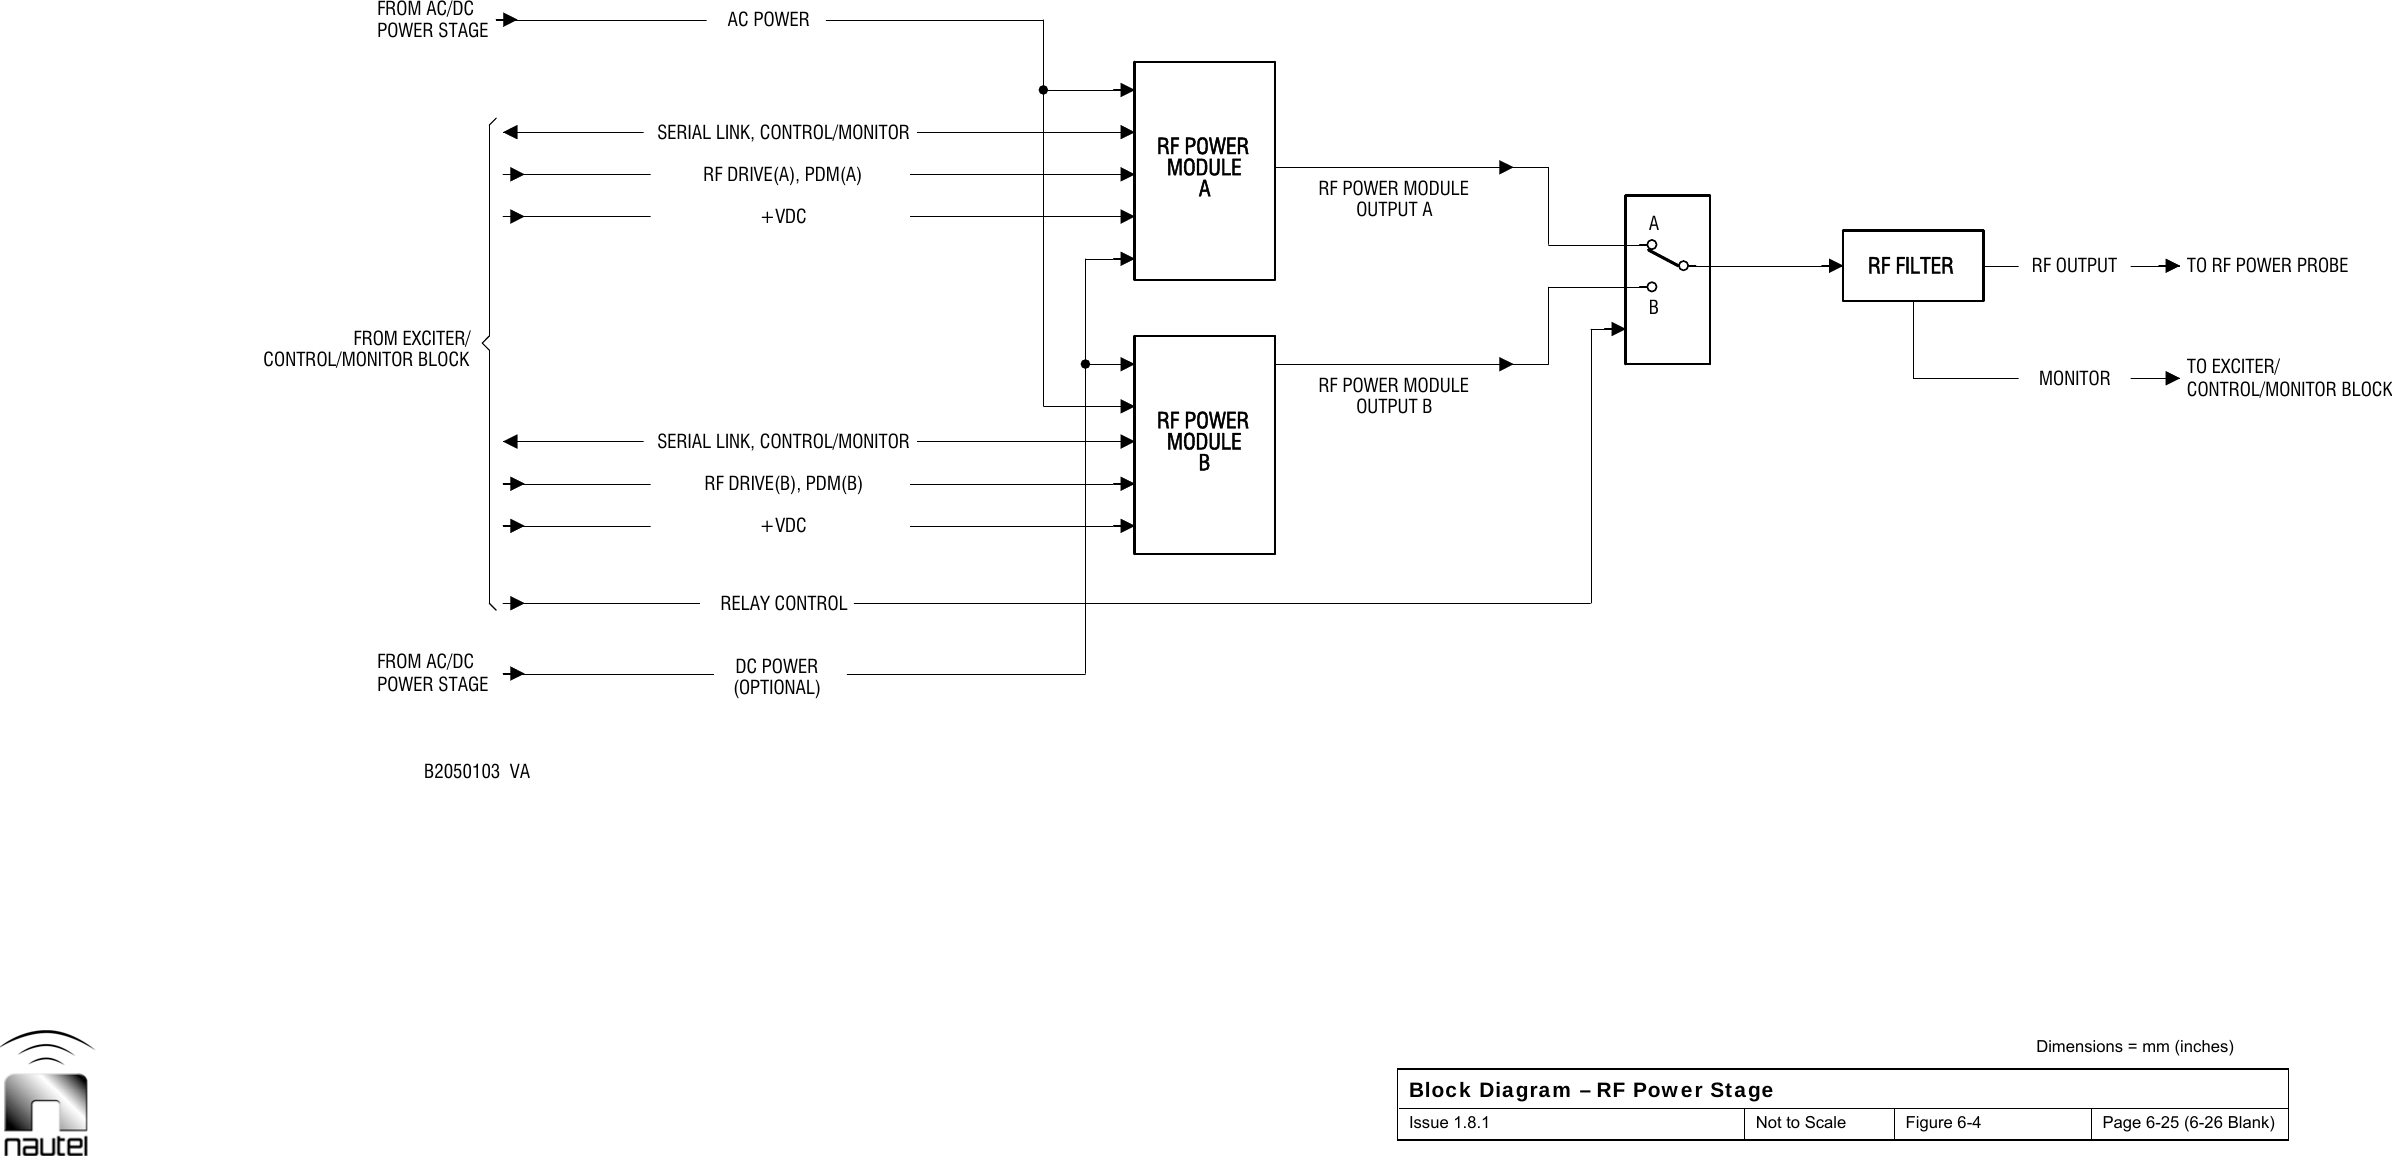  Dimensions = mm (inches) Block Diagram – RF Power Stage Issue 1.8.1  Not to Scale  Figure 6-4  Page 6-25 (6-26 Blank)  BABAB2050103  VADC POWER(OPTIONAL)RELAY CONTROL+VDCRF DRIVE(B), PDM(B)RF DRIVE(A), PDM(A)RF POWER MODULEOUTPUT BRF POWER MODULEOUTPUT ARF FILTER+VDCAC POWERFROM AC/DCPOWER STAGEFROM EXCITER/SERIAL LINK, CONTROL/MONITORMONITORRF OUTPUT TO RF POWER PROBEMODULERF POWERSERIAL LINK, CONTROL/MONITORCONTROL/MONITOR BLOCKMODULERF POWERFROM AC/DCPOWER STAGETO EXCITER/CONTROL/MONITOR BLOCK